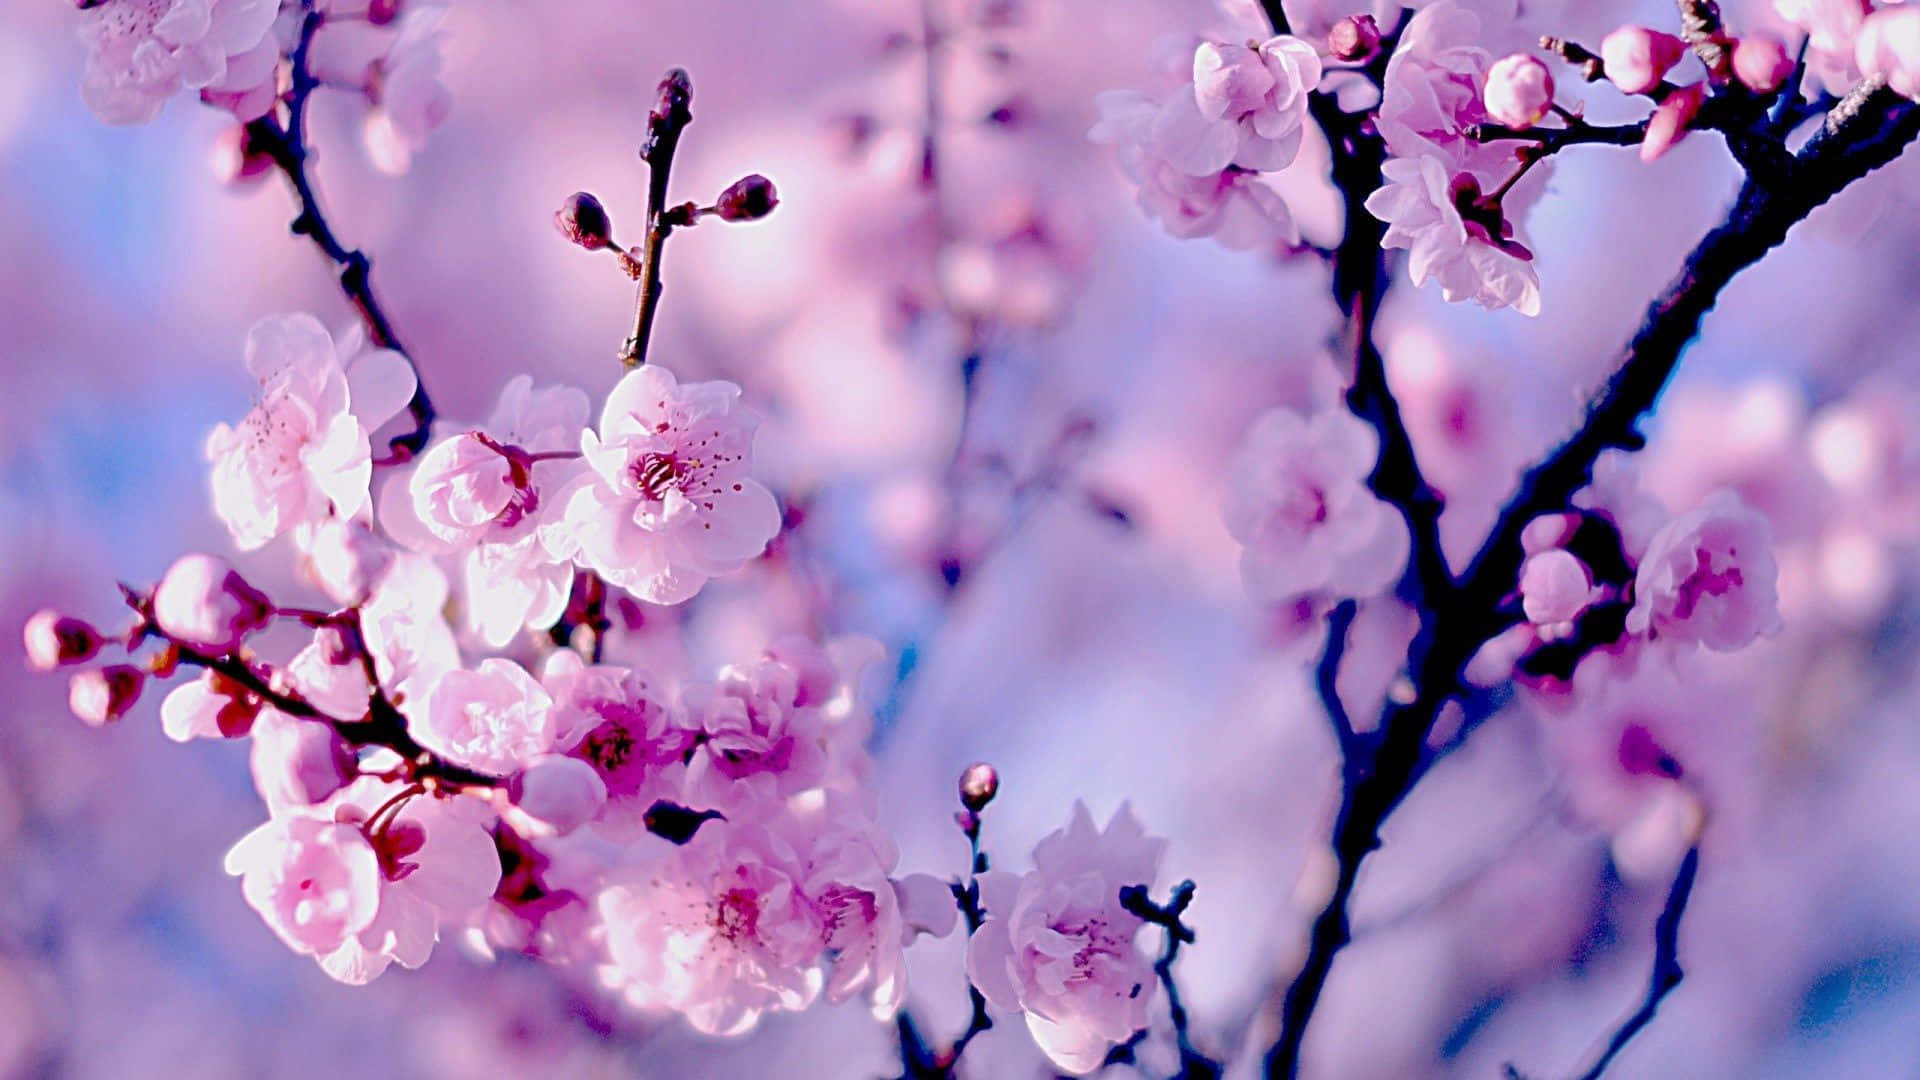 A beautiful pink sakura blossom tree in bloom against a blue sky Wallpaper